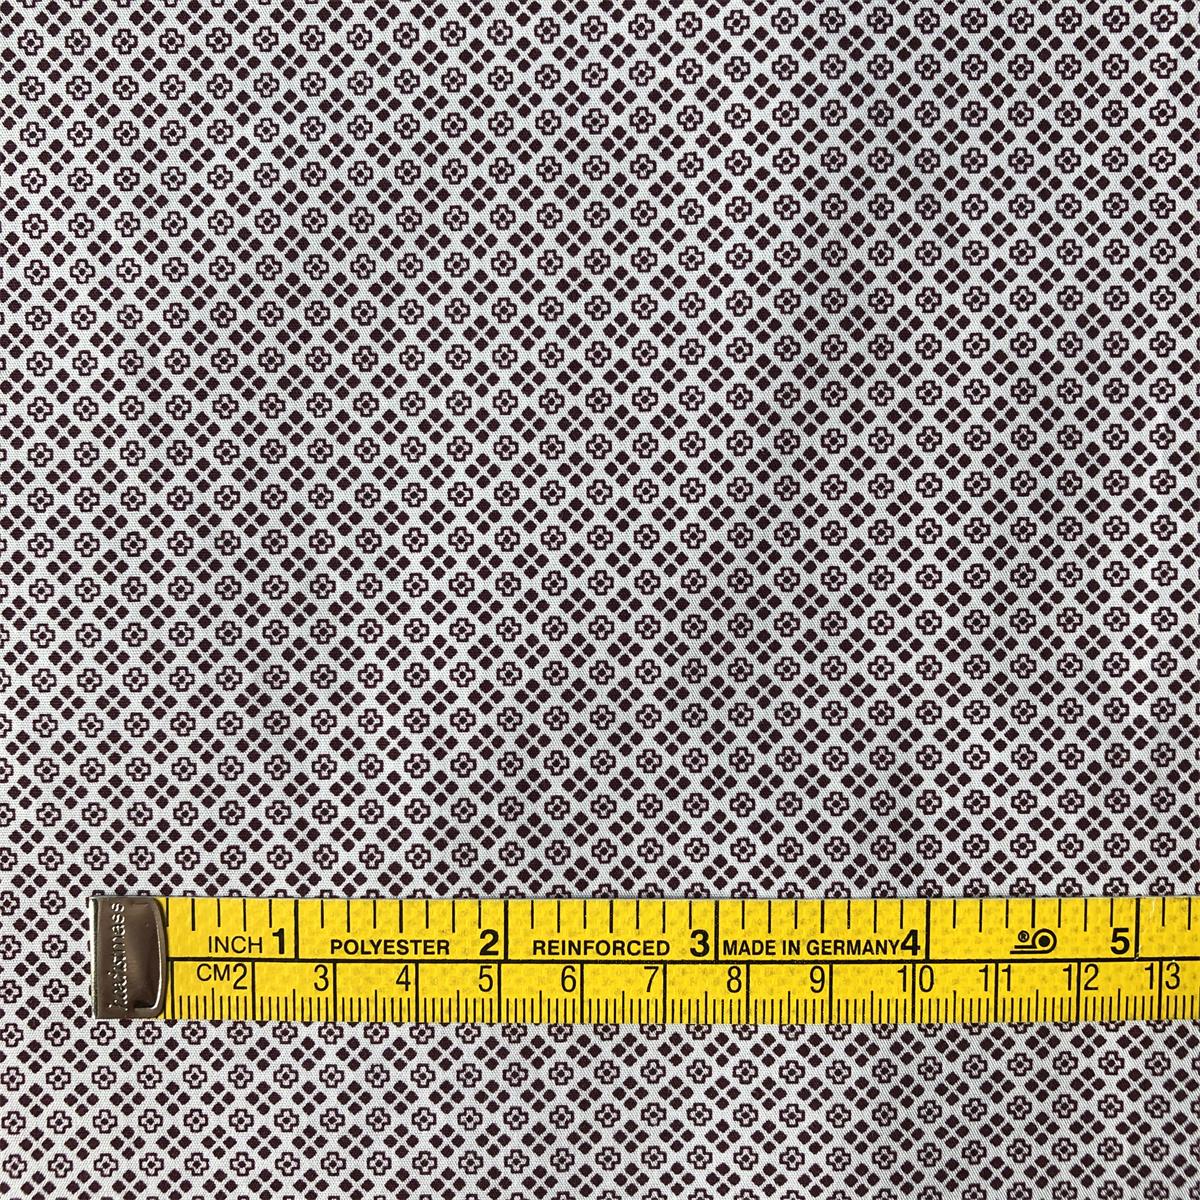 Eco-friendly Textile Cotton Printed fabric for mens casual shirts 100 cotton poplin printed shirts woven fabric soft touch